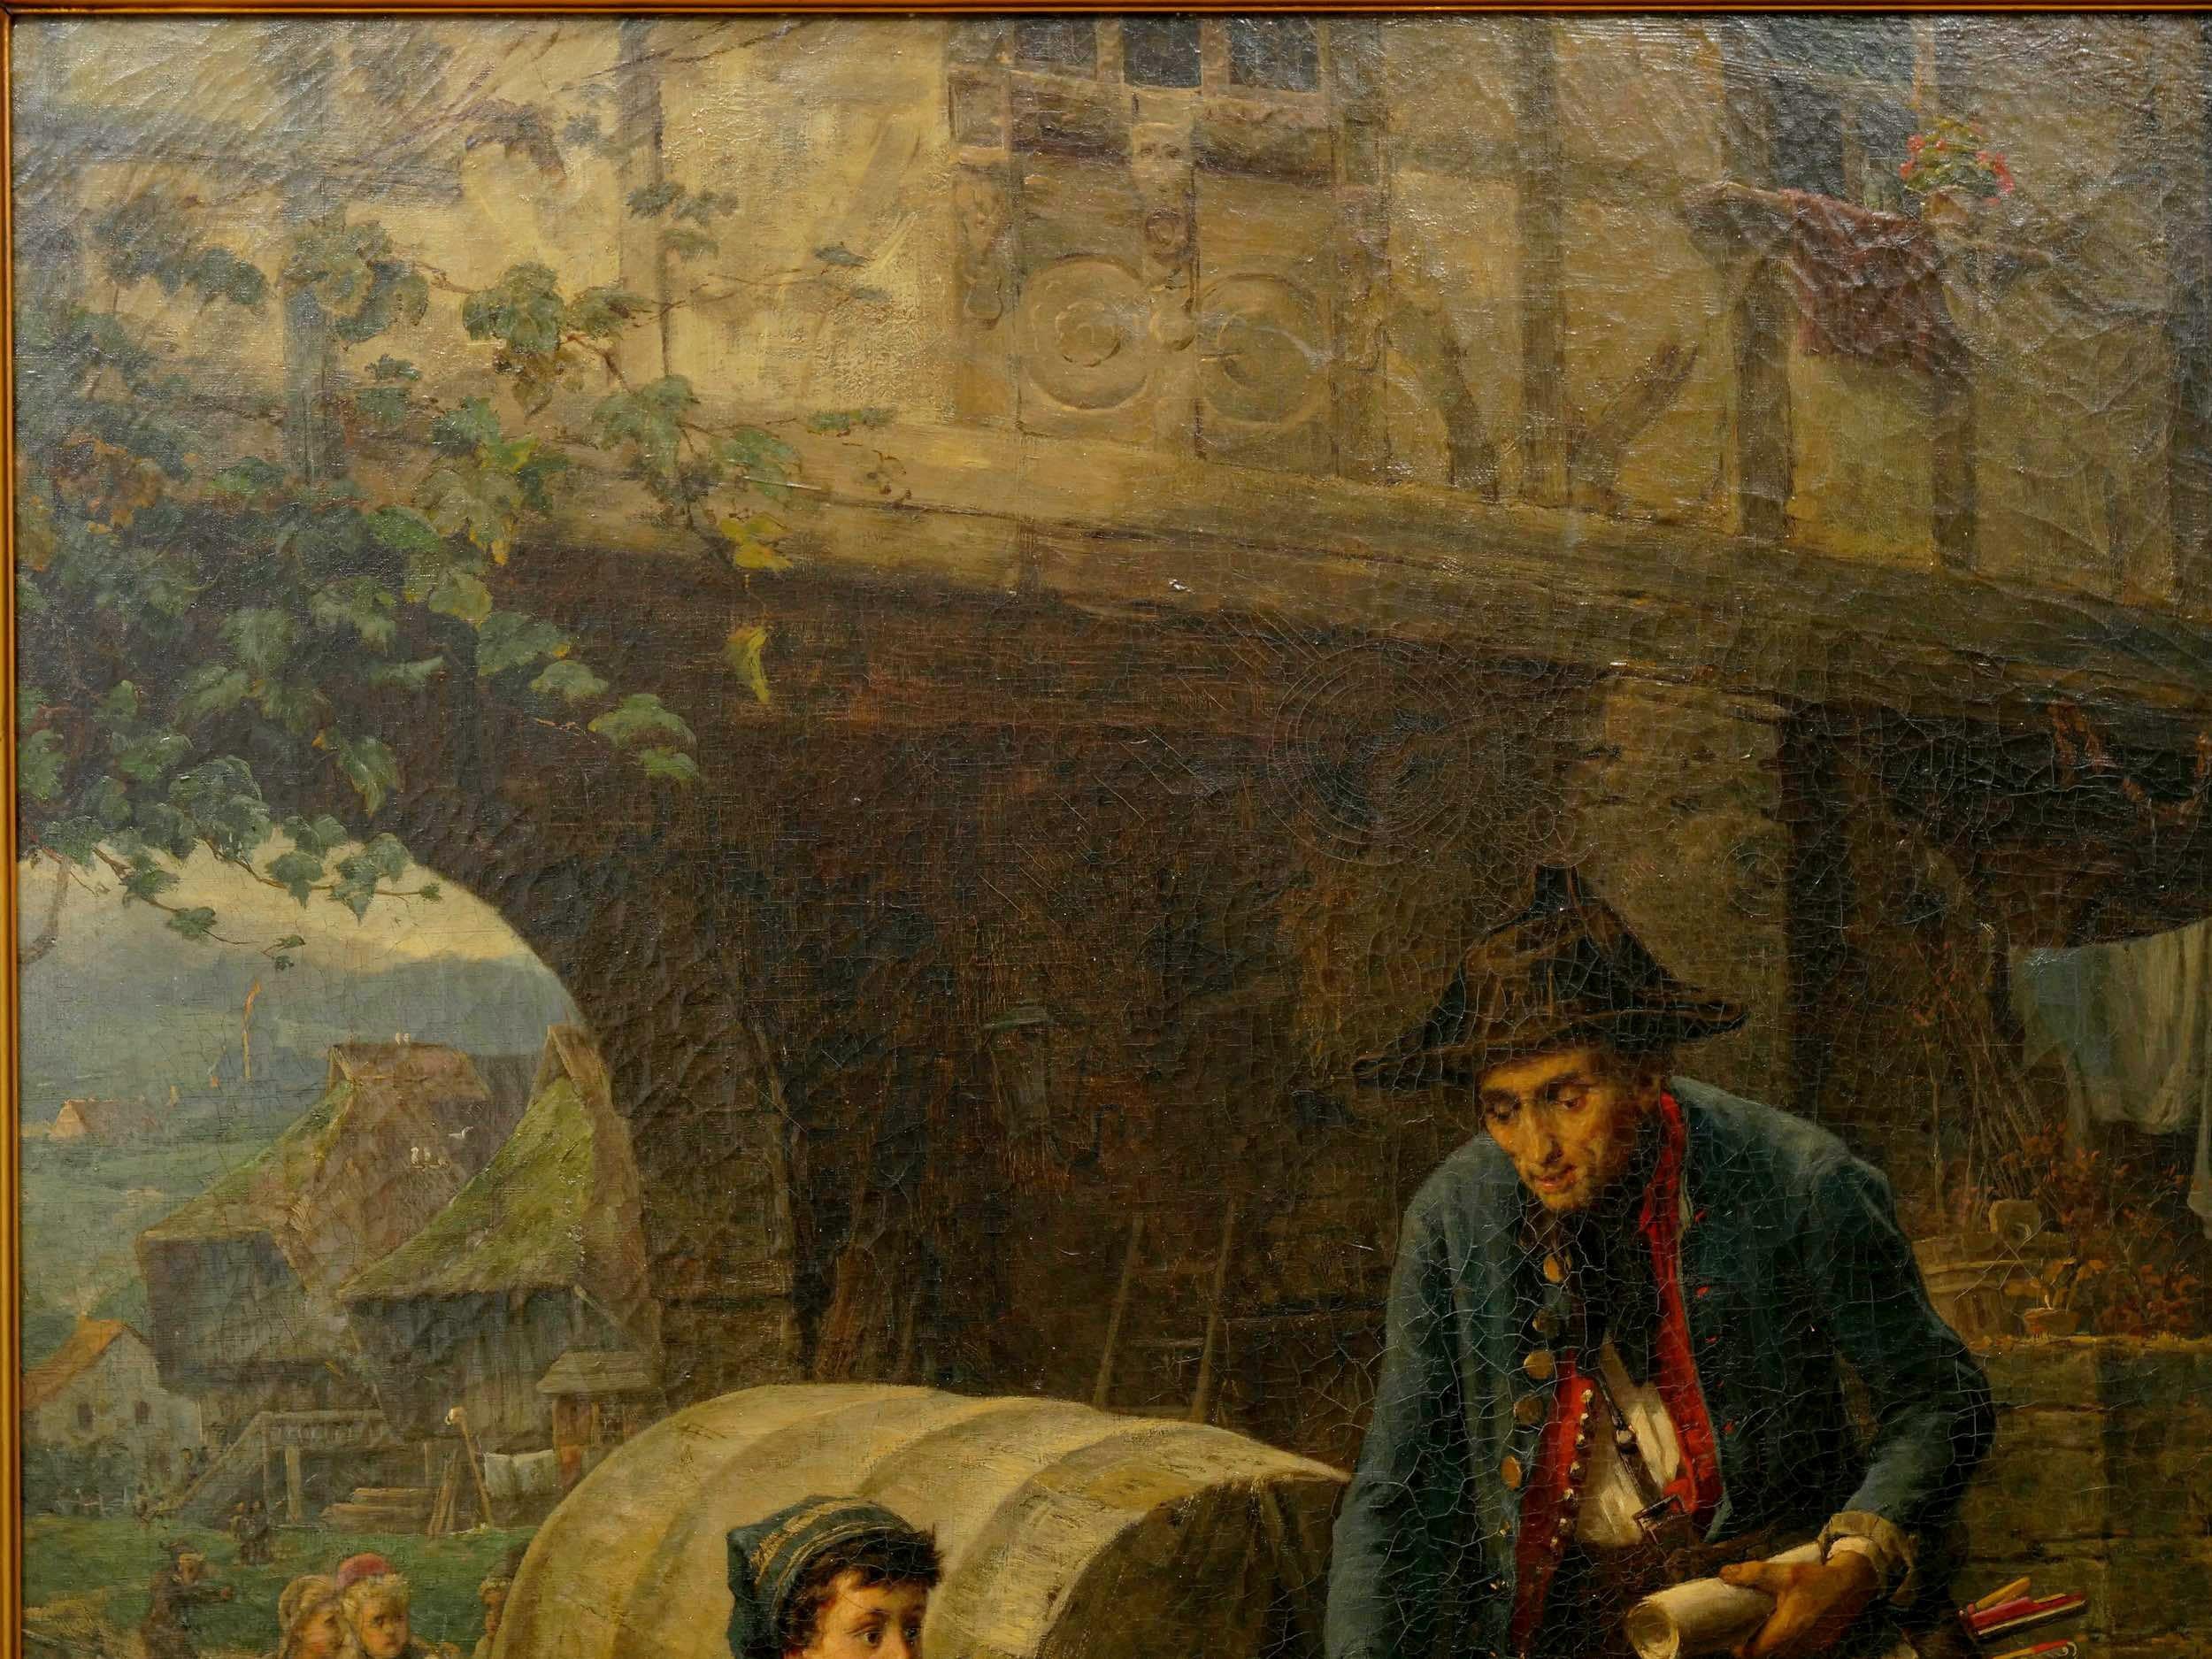 Oiled “The Toy Seller” (1874) Antique Oil Painting by Fritz Beinke (German, 1842-1907